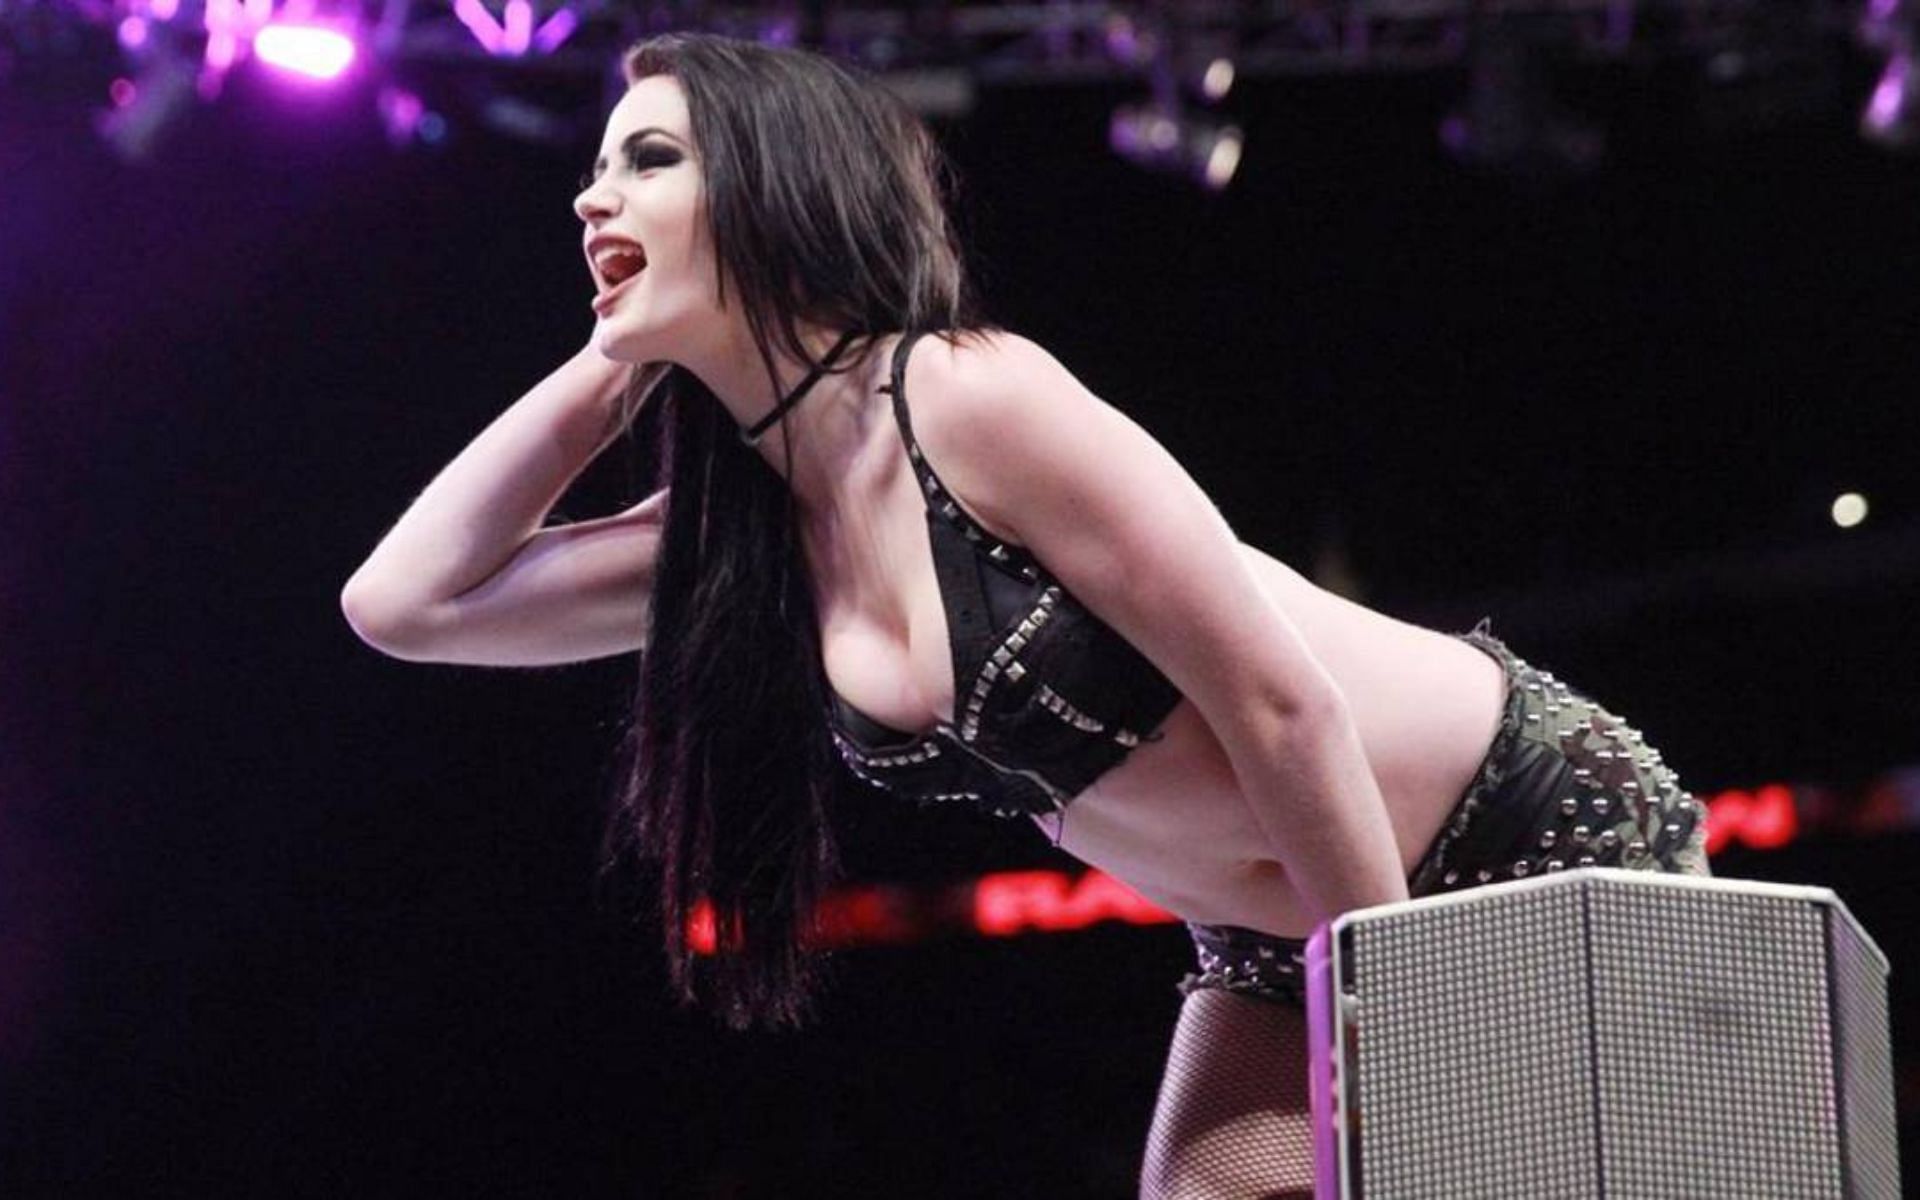 Paige is not finished with WWE just yet